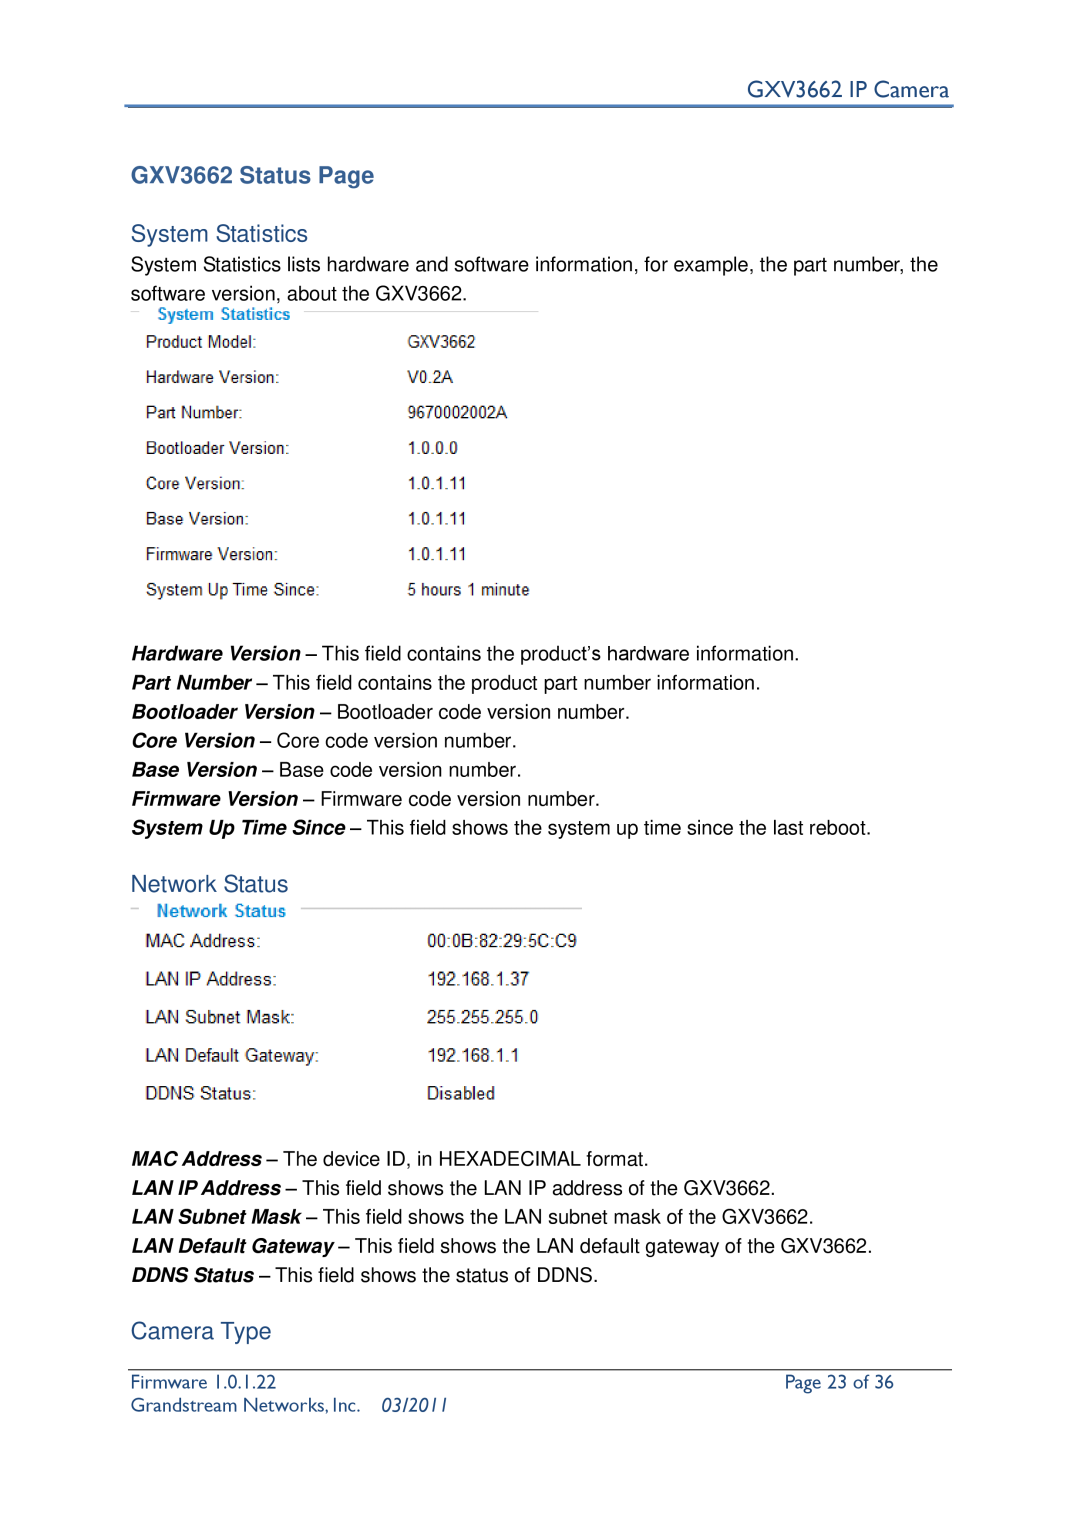 Grandstream Networks GXV3662 Status Page, System Statistics, Network Status, Camera Type, Page 23 of, GXV3662 IP Camera 